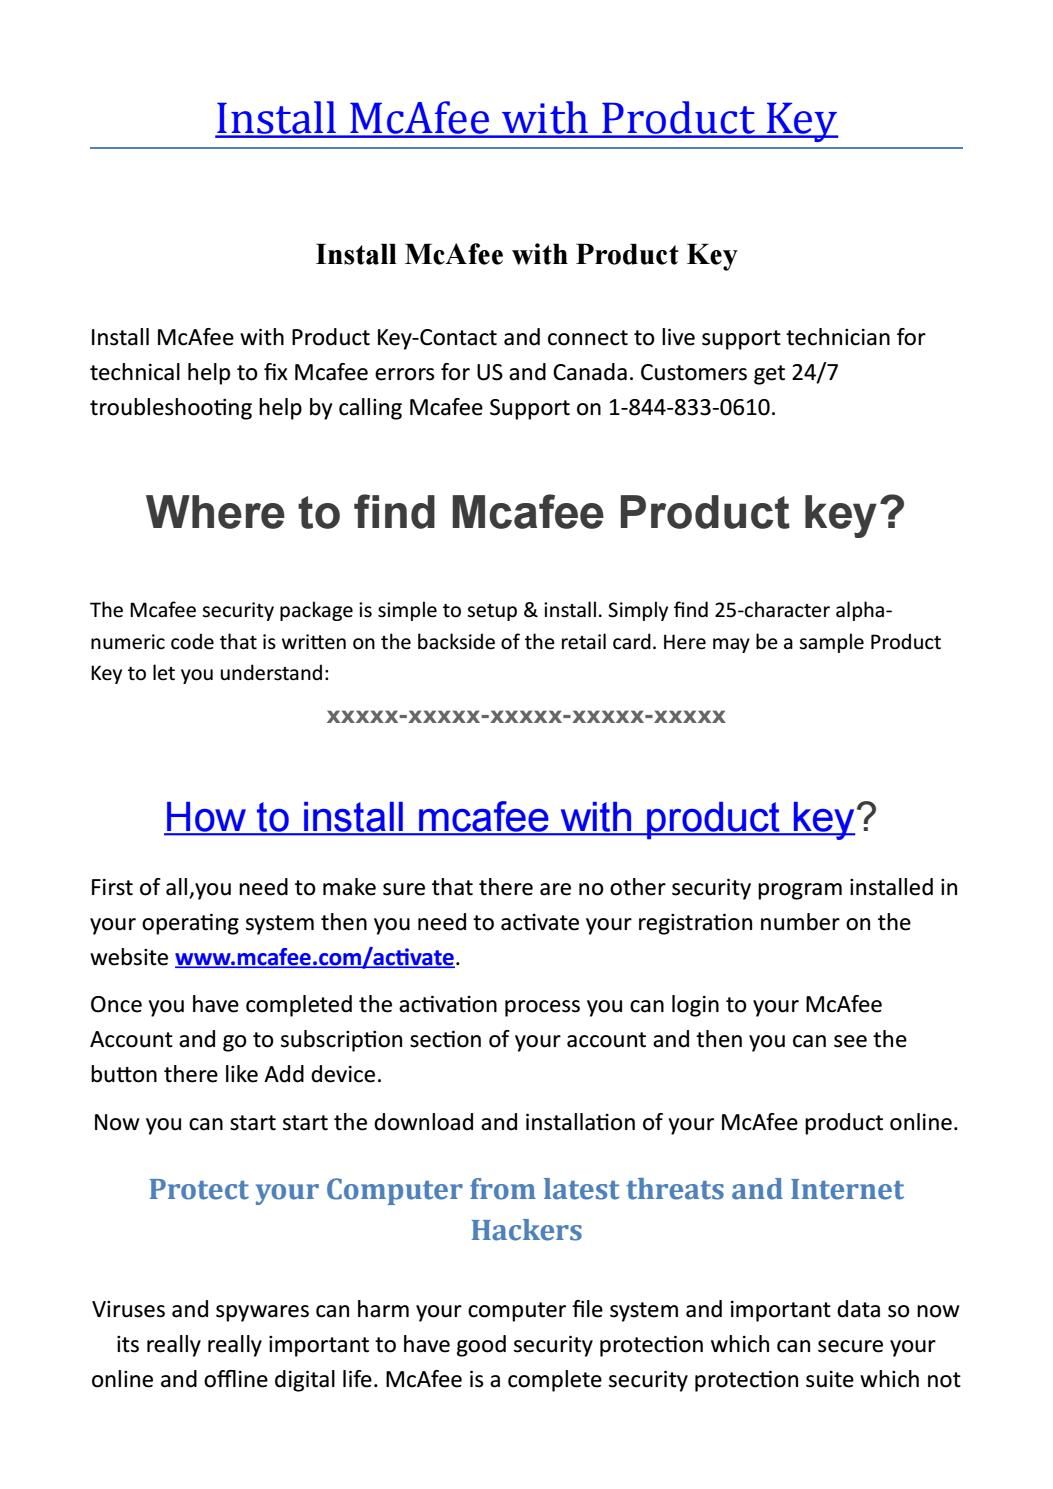 mcafee installation with product key